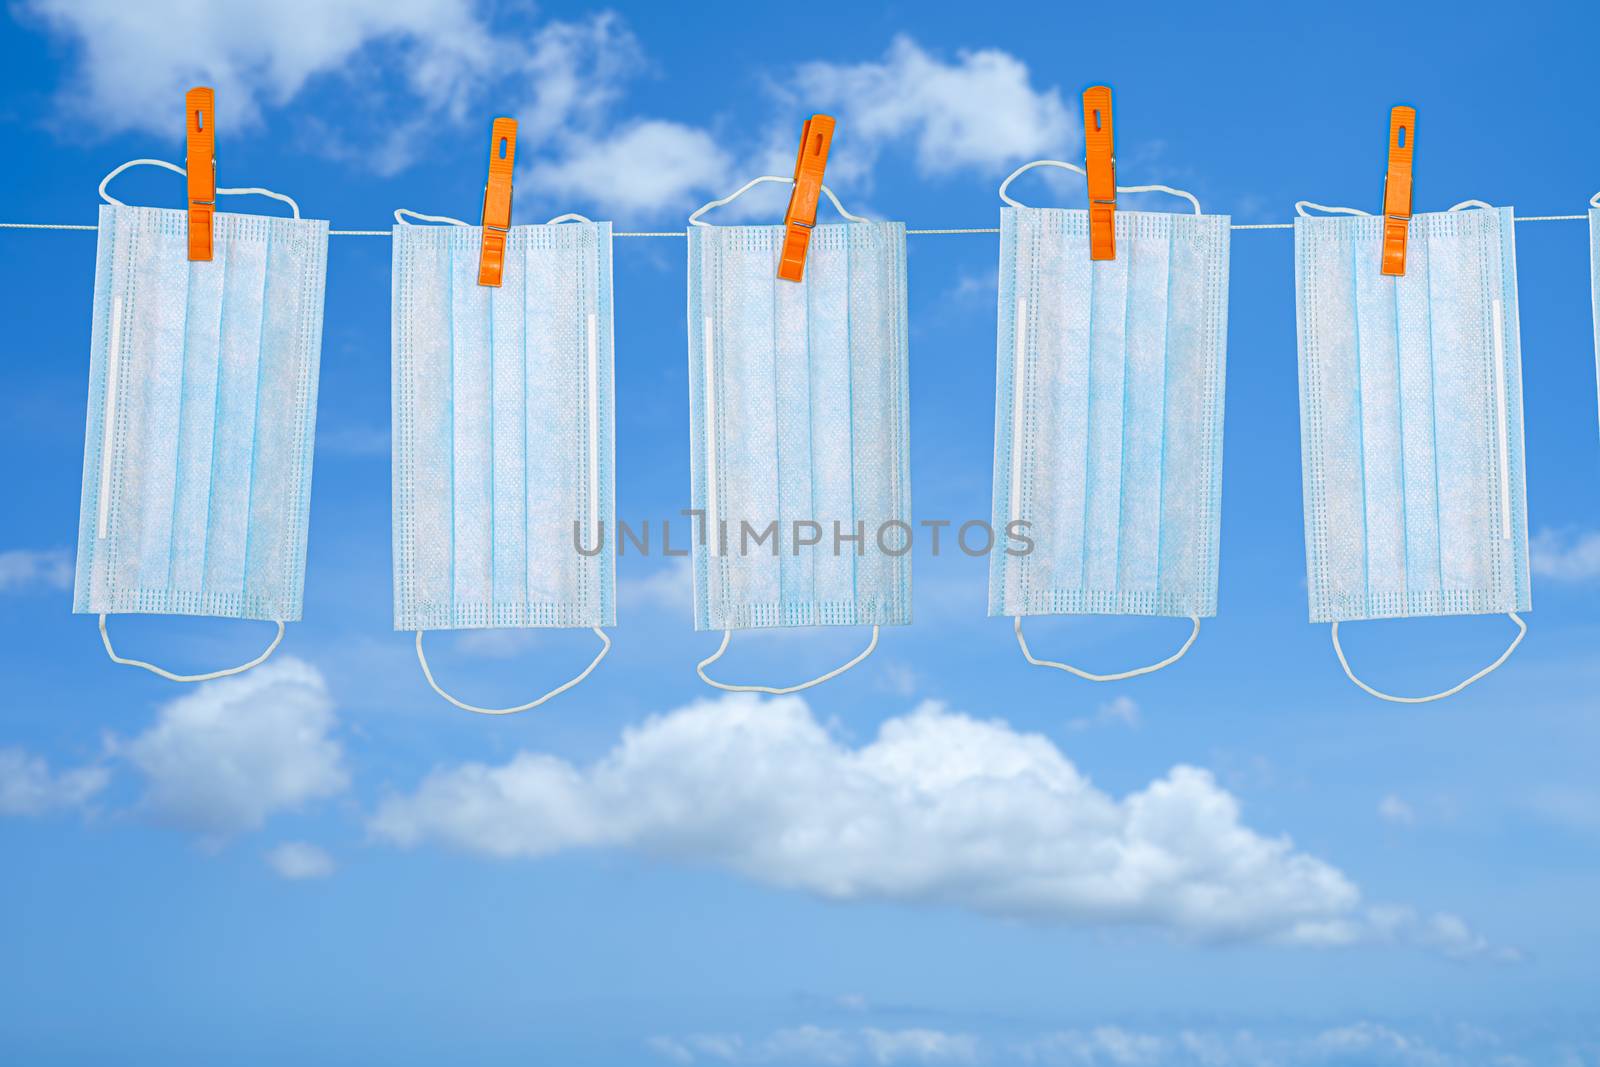 Drying mask hanging under the sun after use for disinfecting. Copy space available.